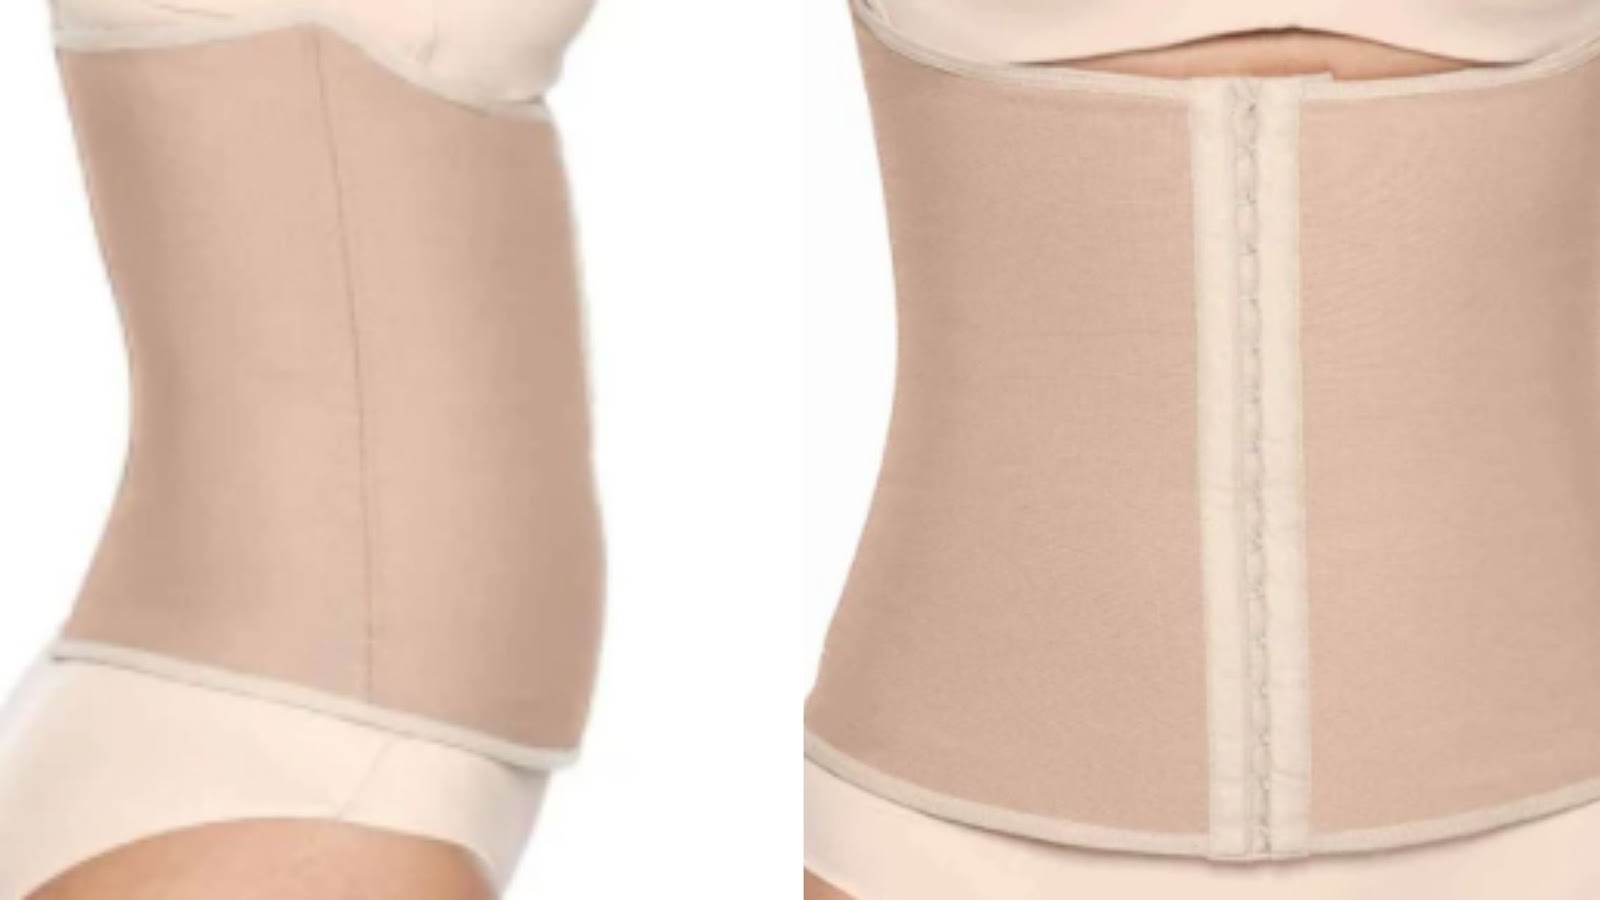 Waist Trainer for Women: How Does It Work and What Are Its Benefits